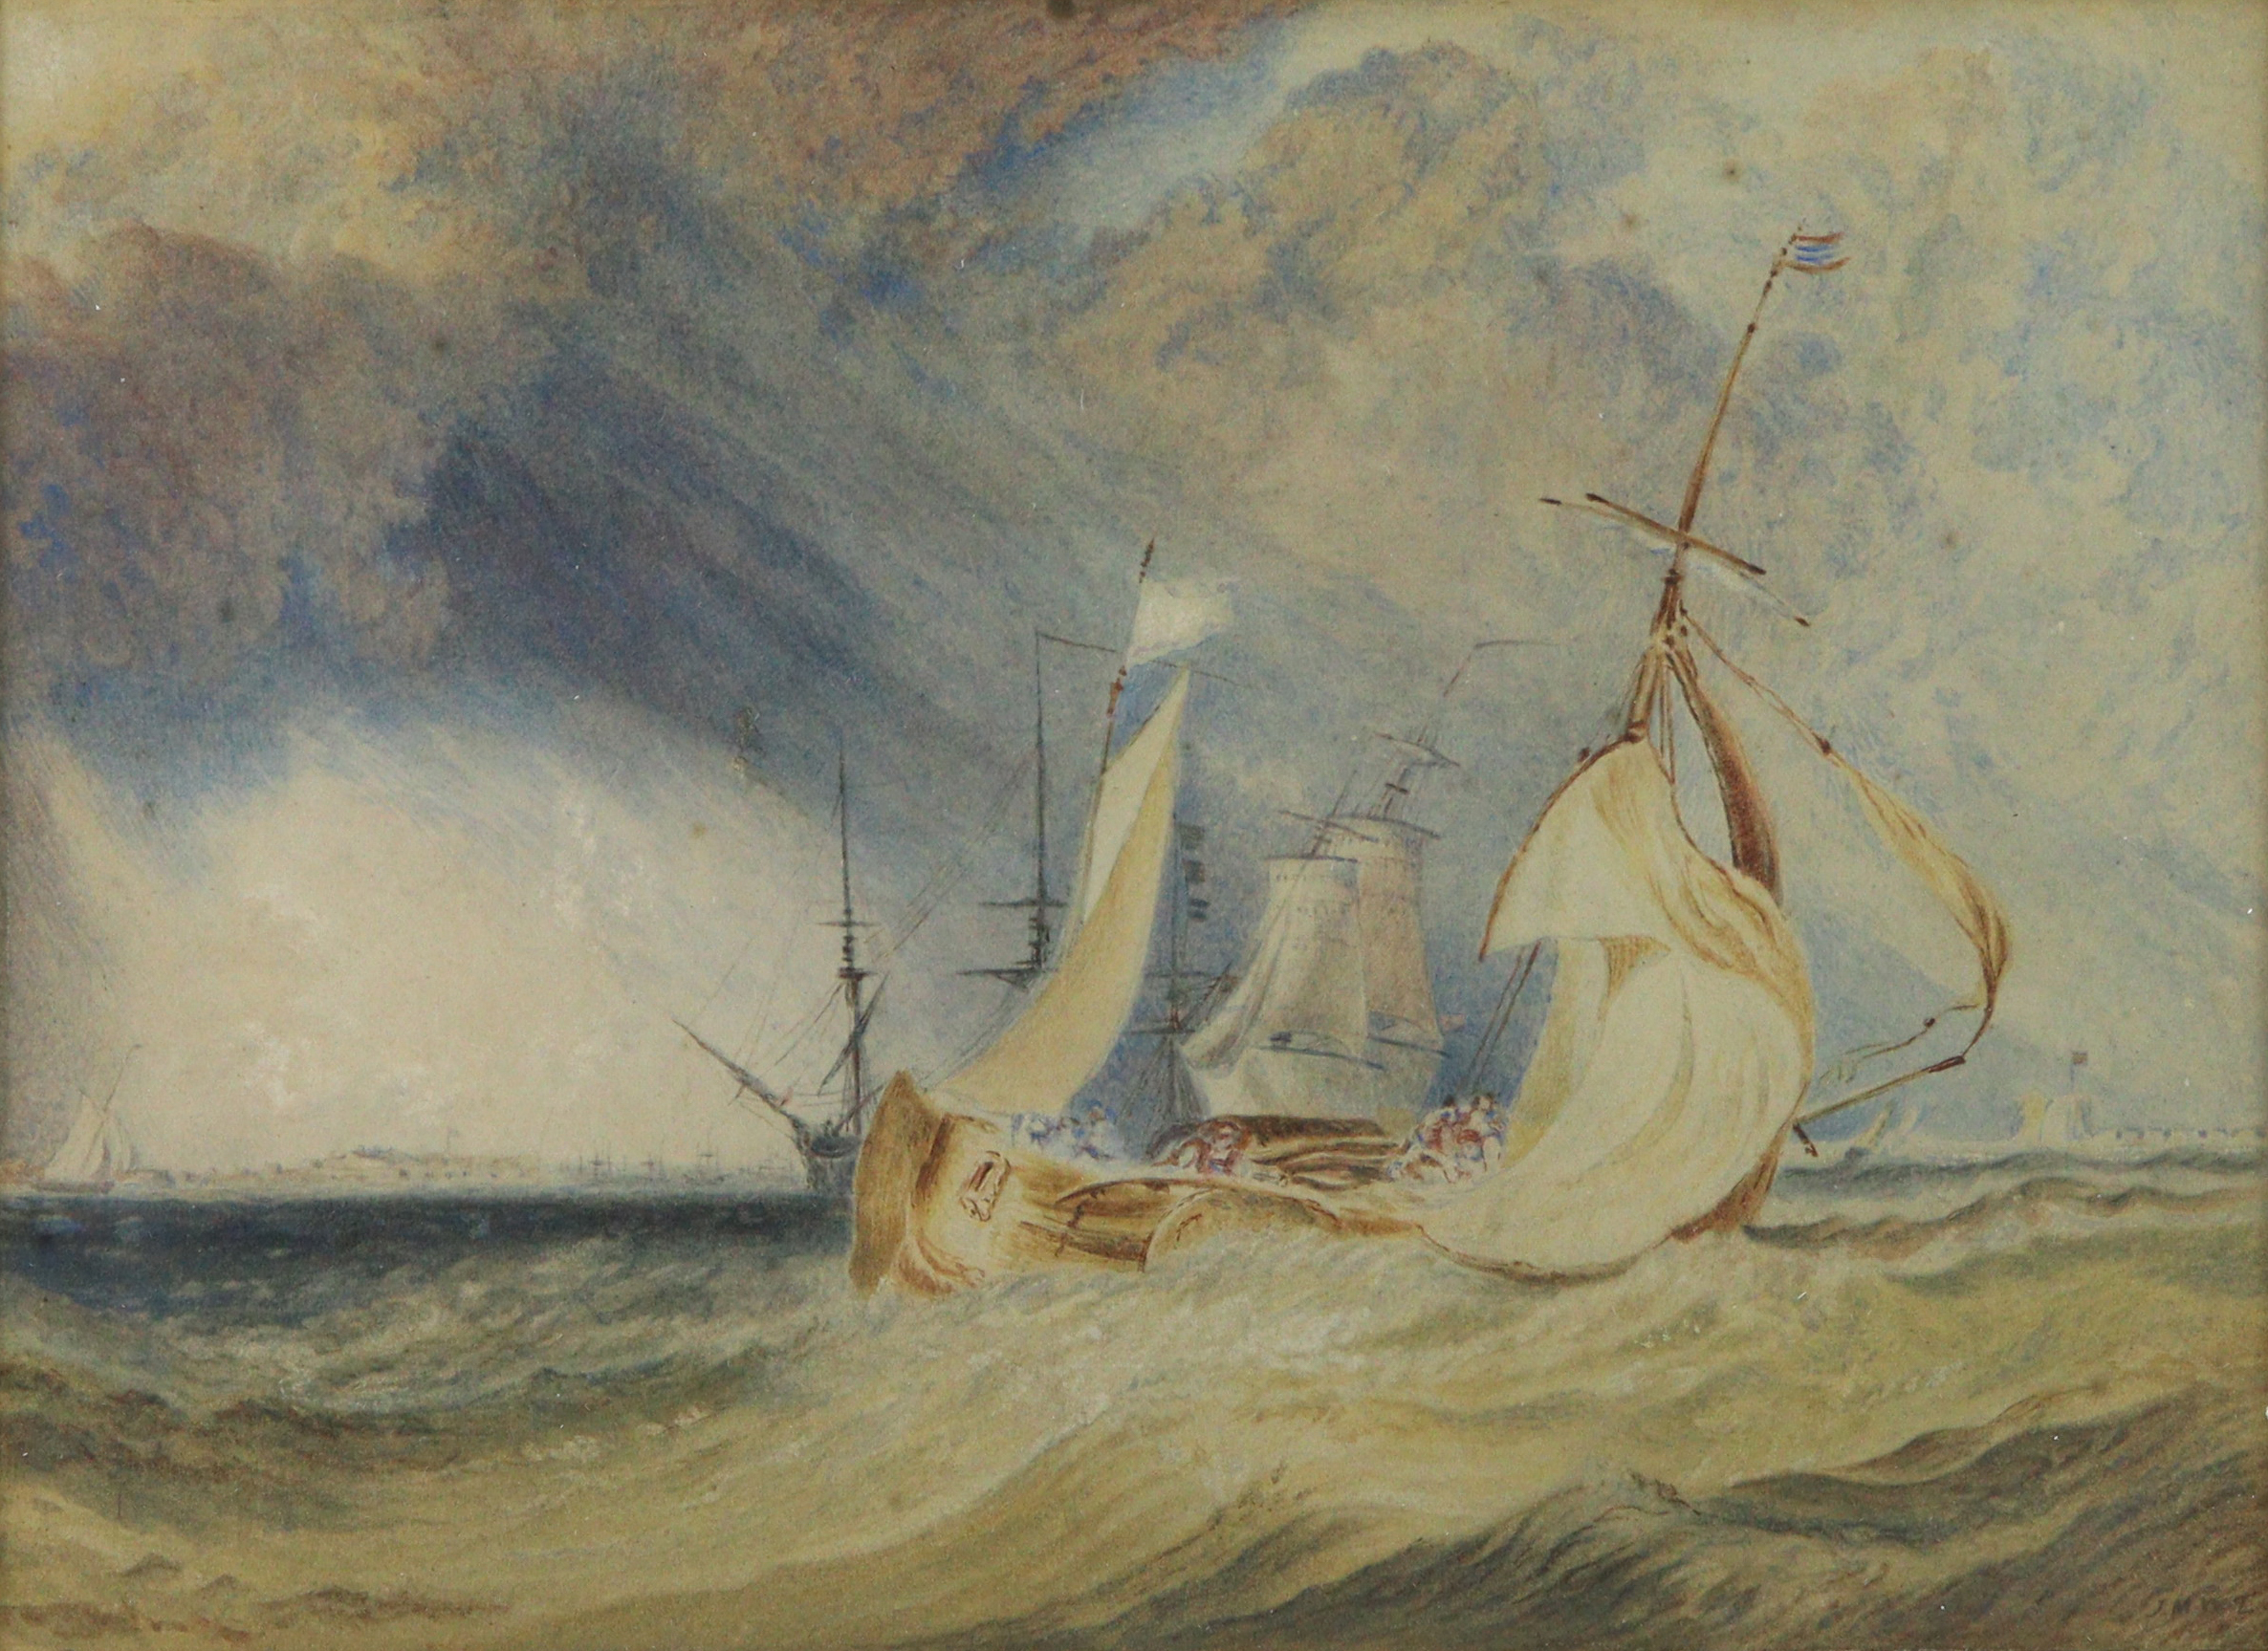 After Joseph Mallord William Turner, R.A - Image 6 of 6